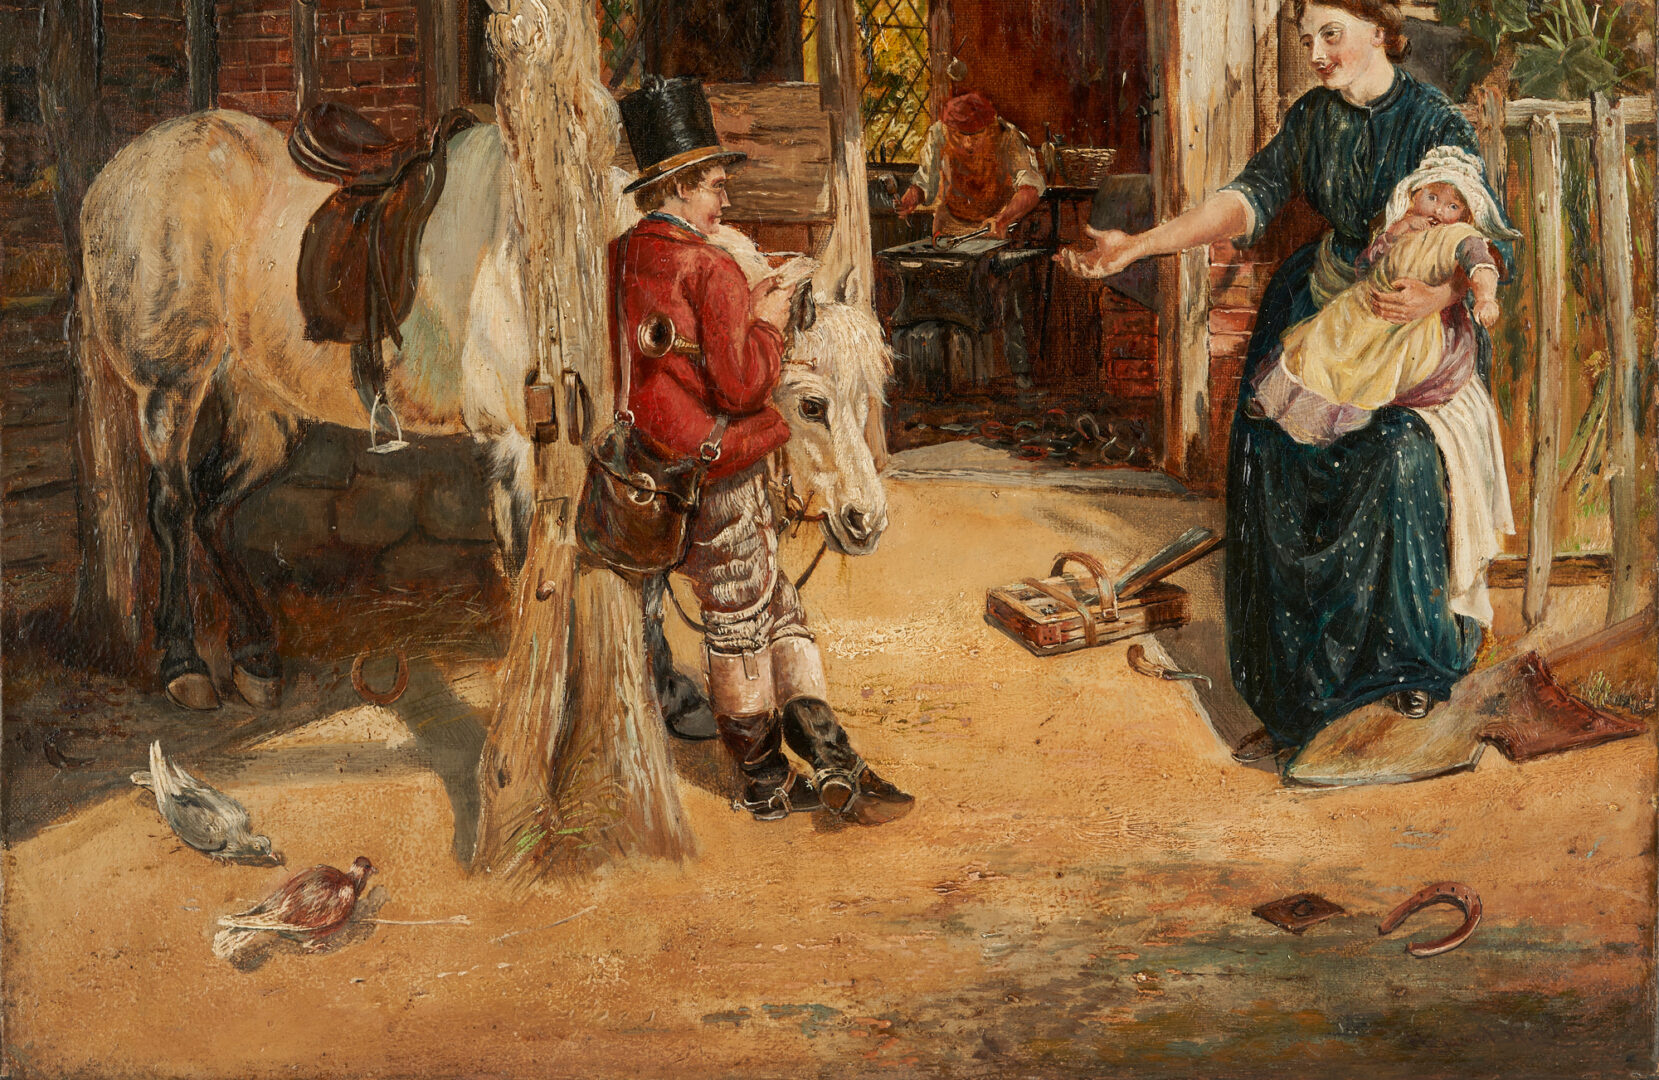 Lot 1153: English School O/C Painting After The Village Smithy, Circa 1860